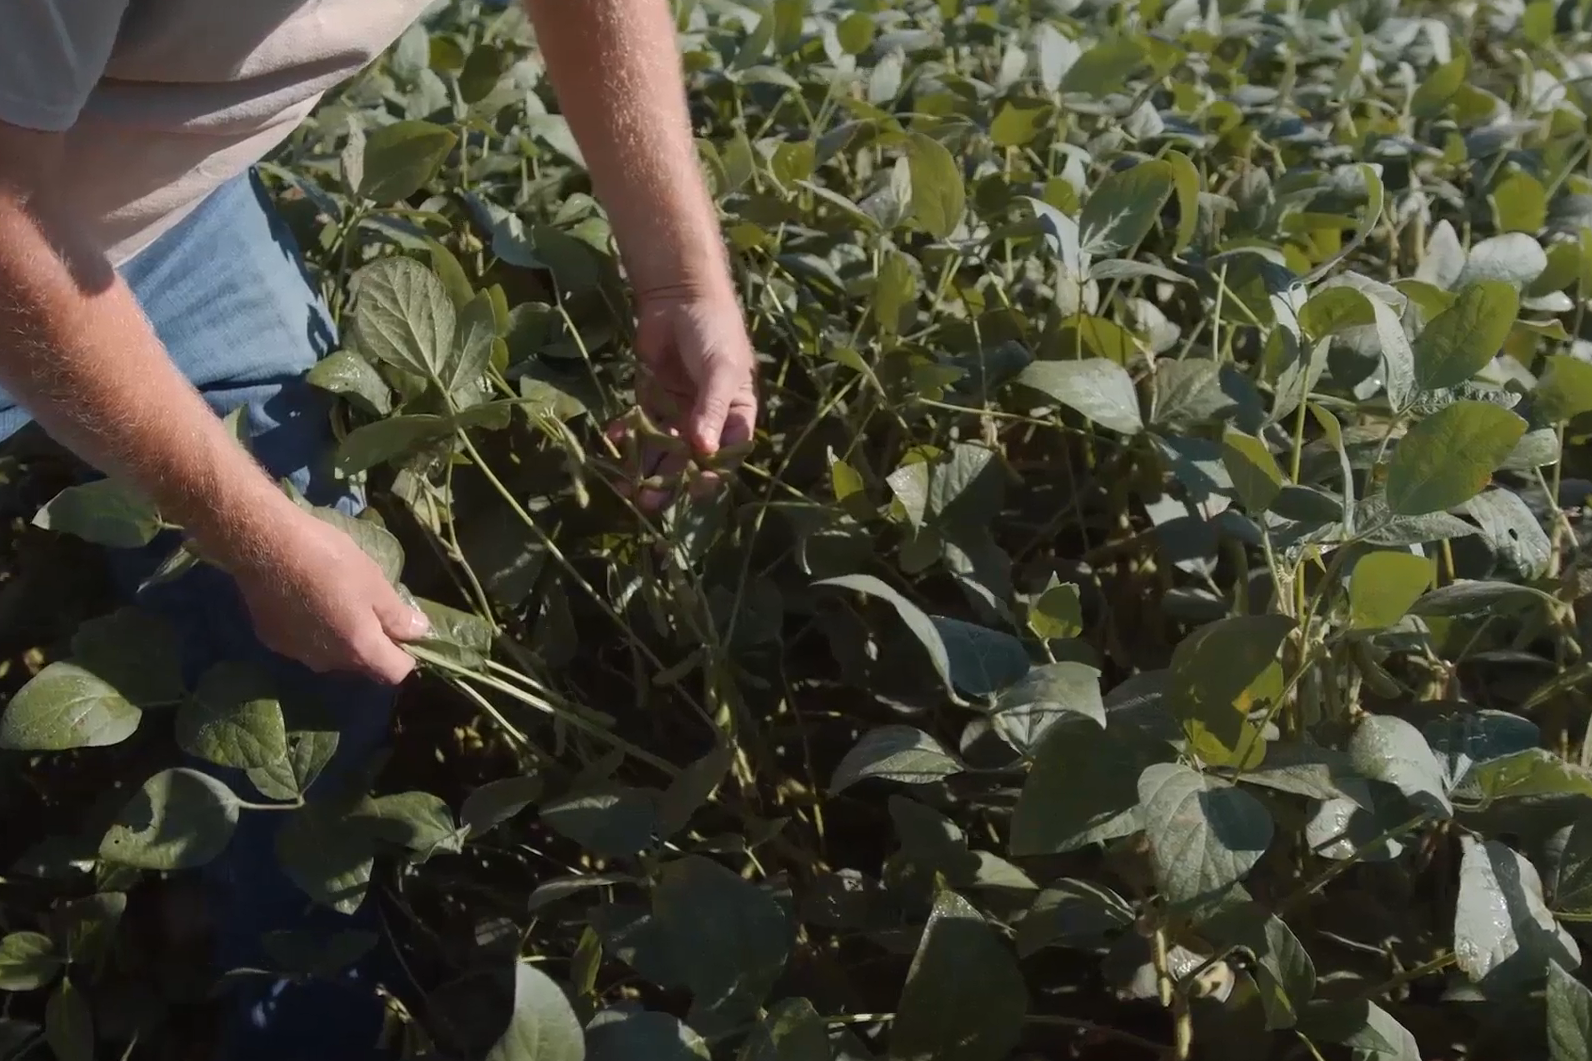 Close up of man kneeling in High Oleic Soybean field touching the leaves.